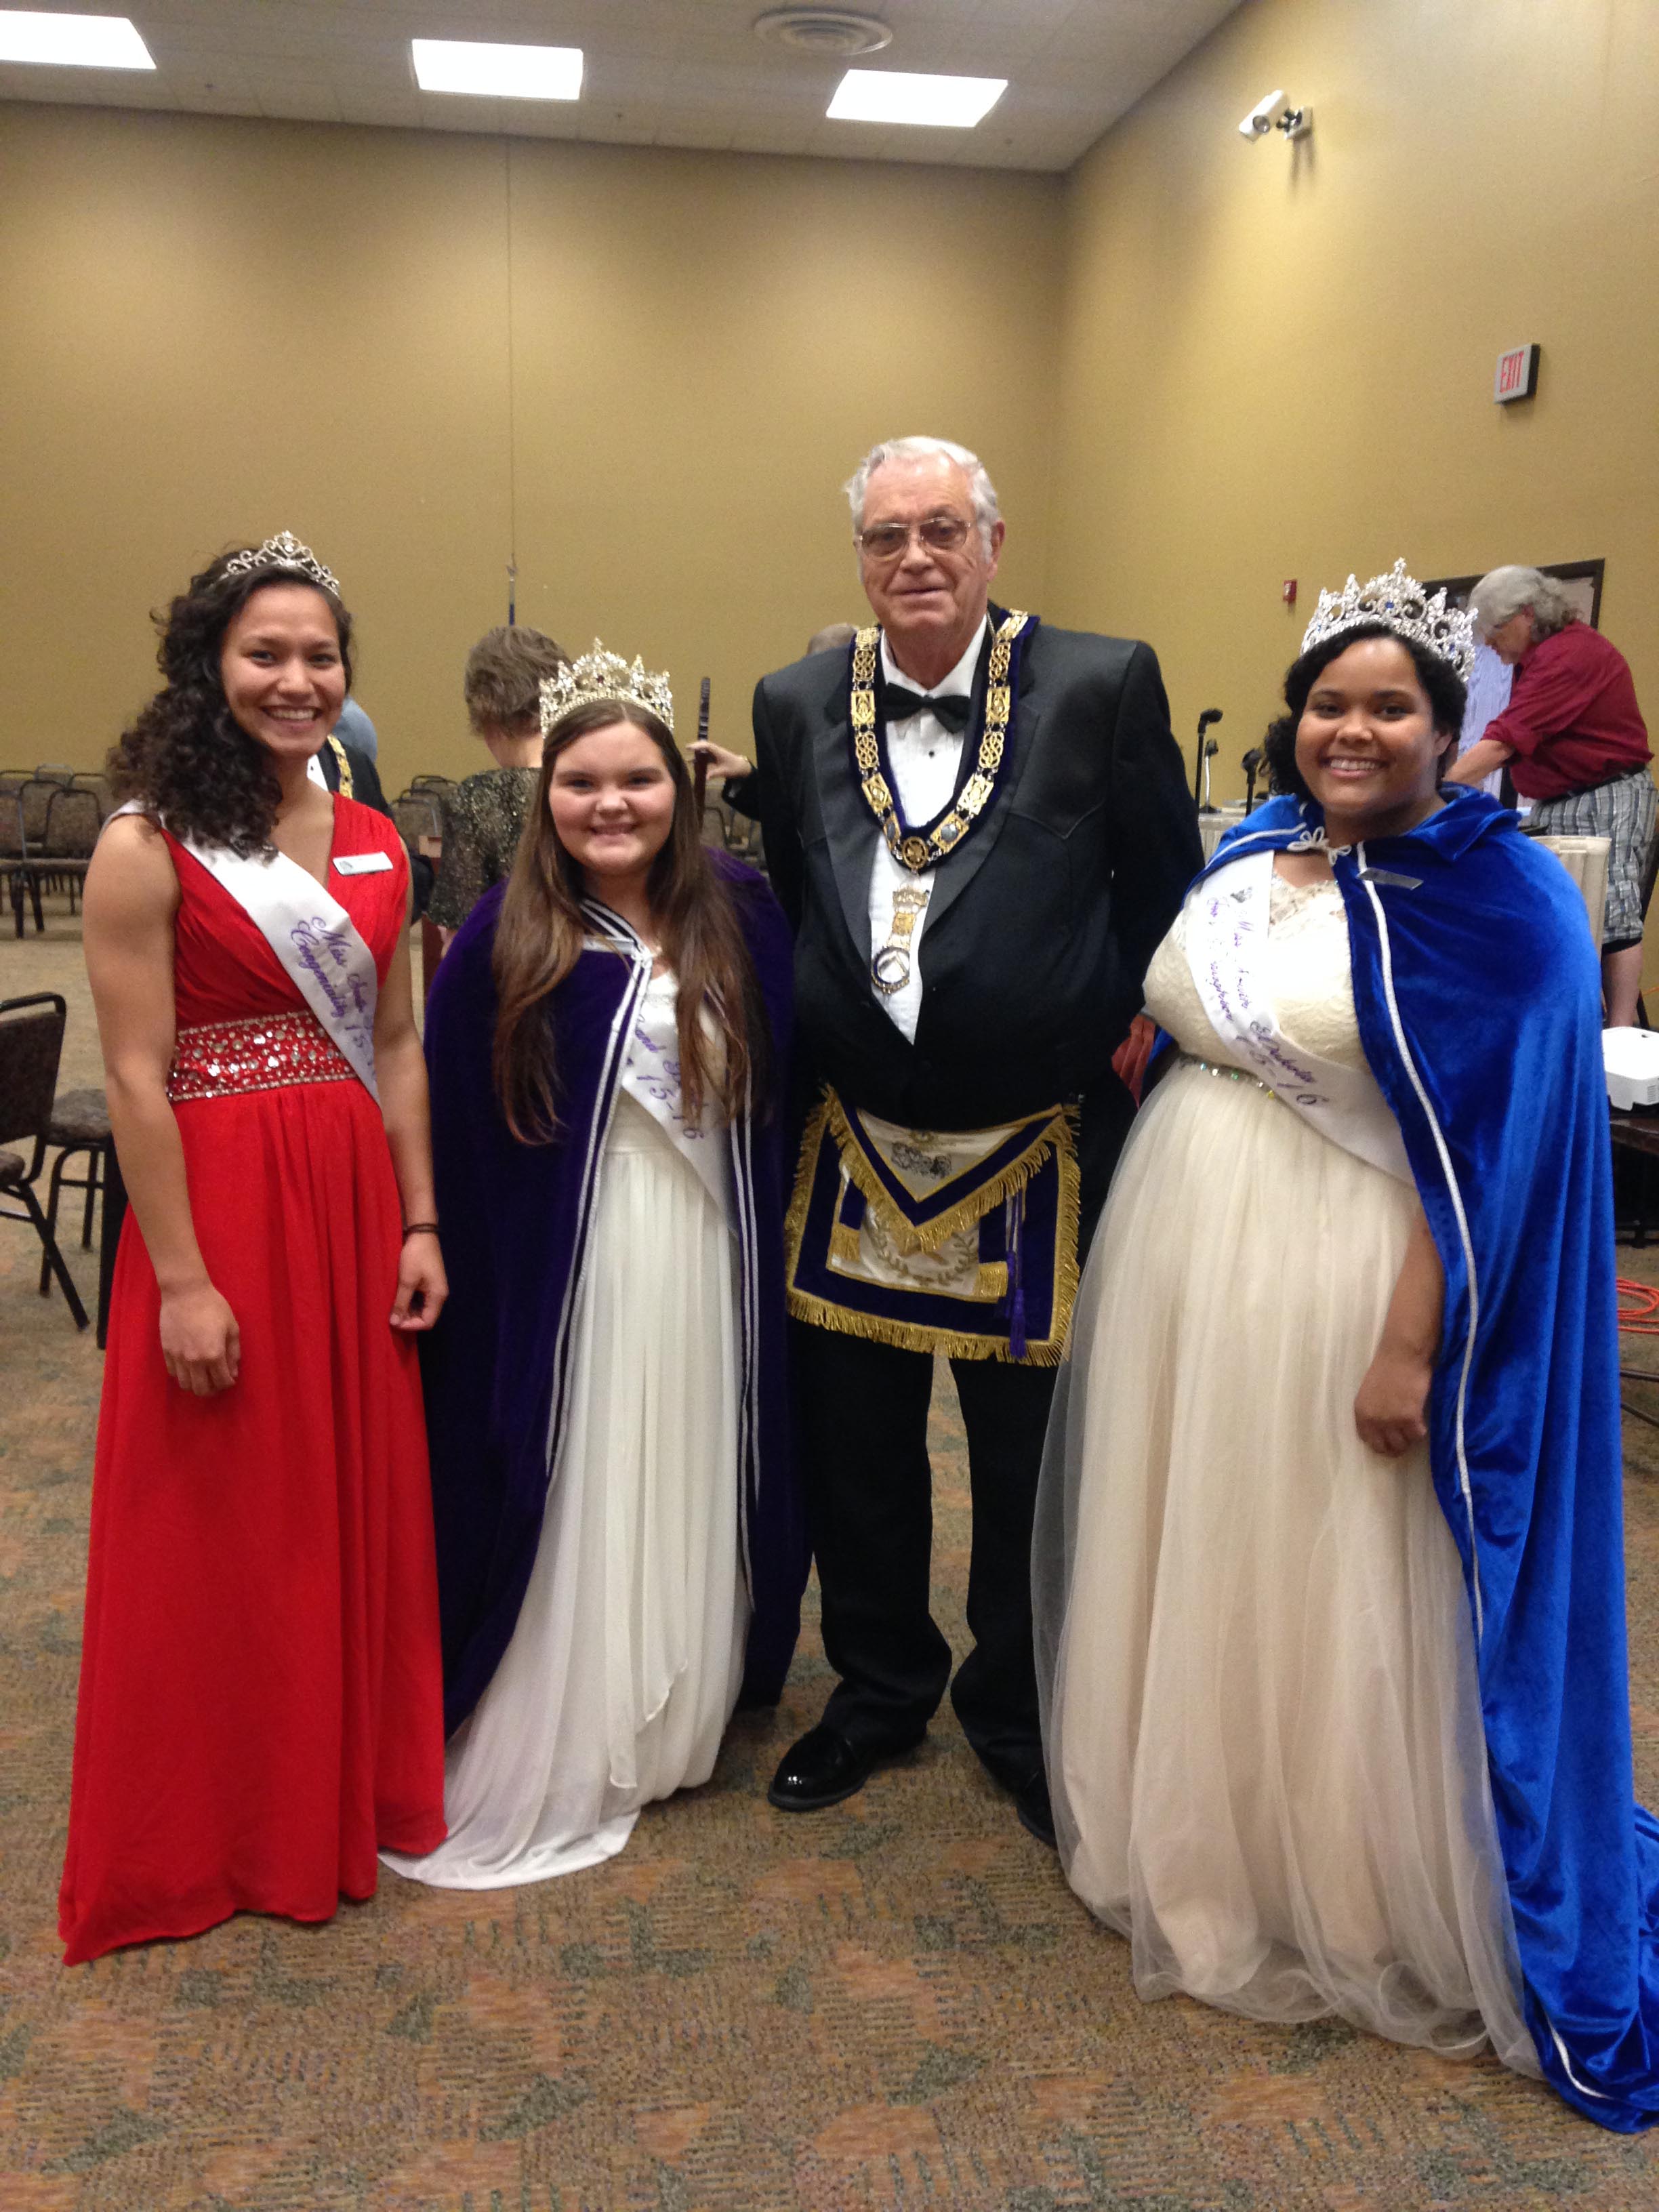 MSDJDC Valerie, GBHQ Alesha, and MSDJD Teagan during their visit to the 2015 Grand Lodge.